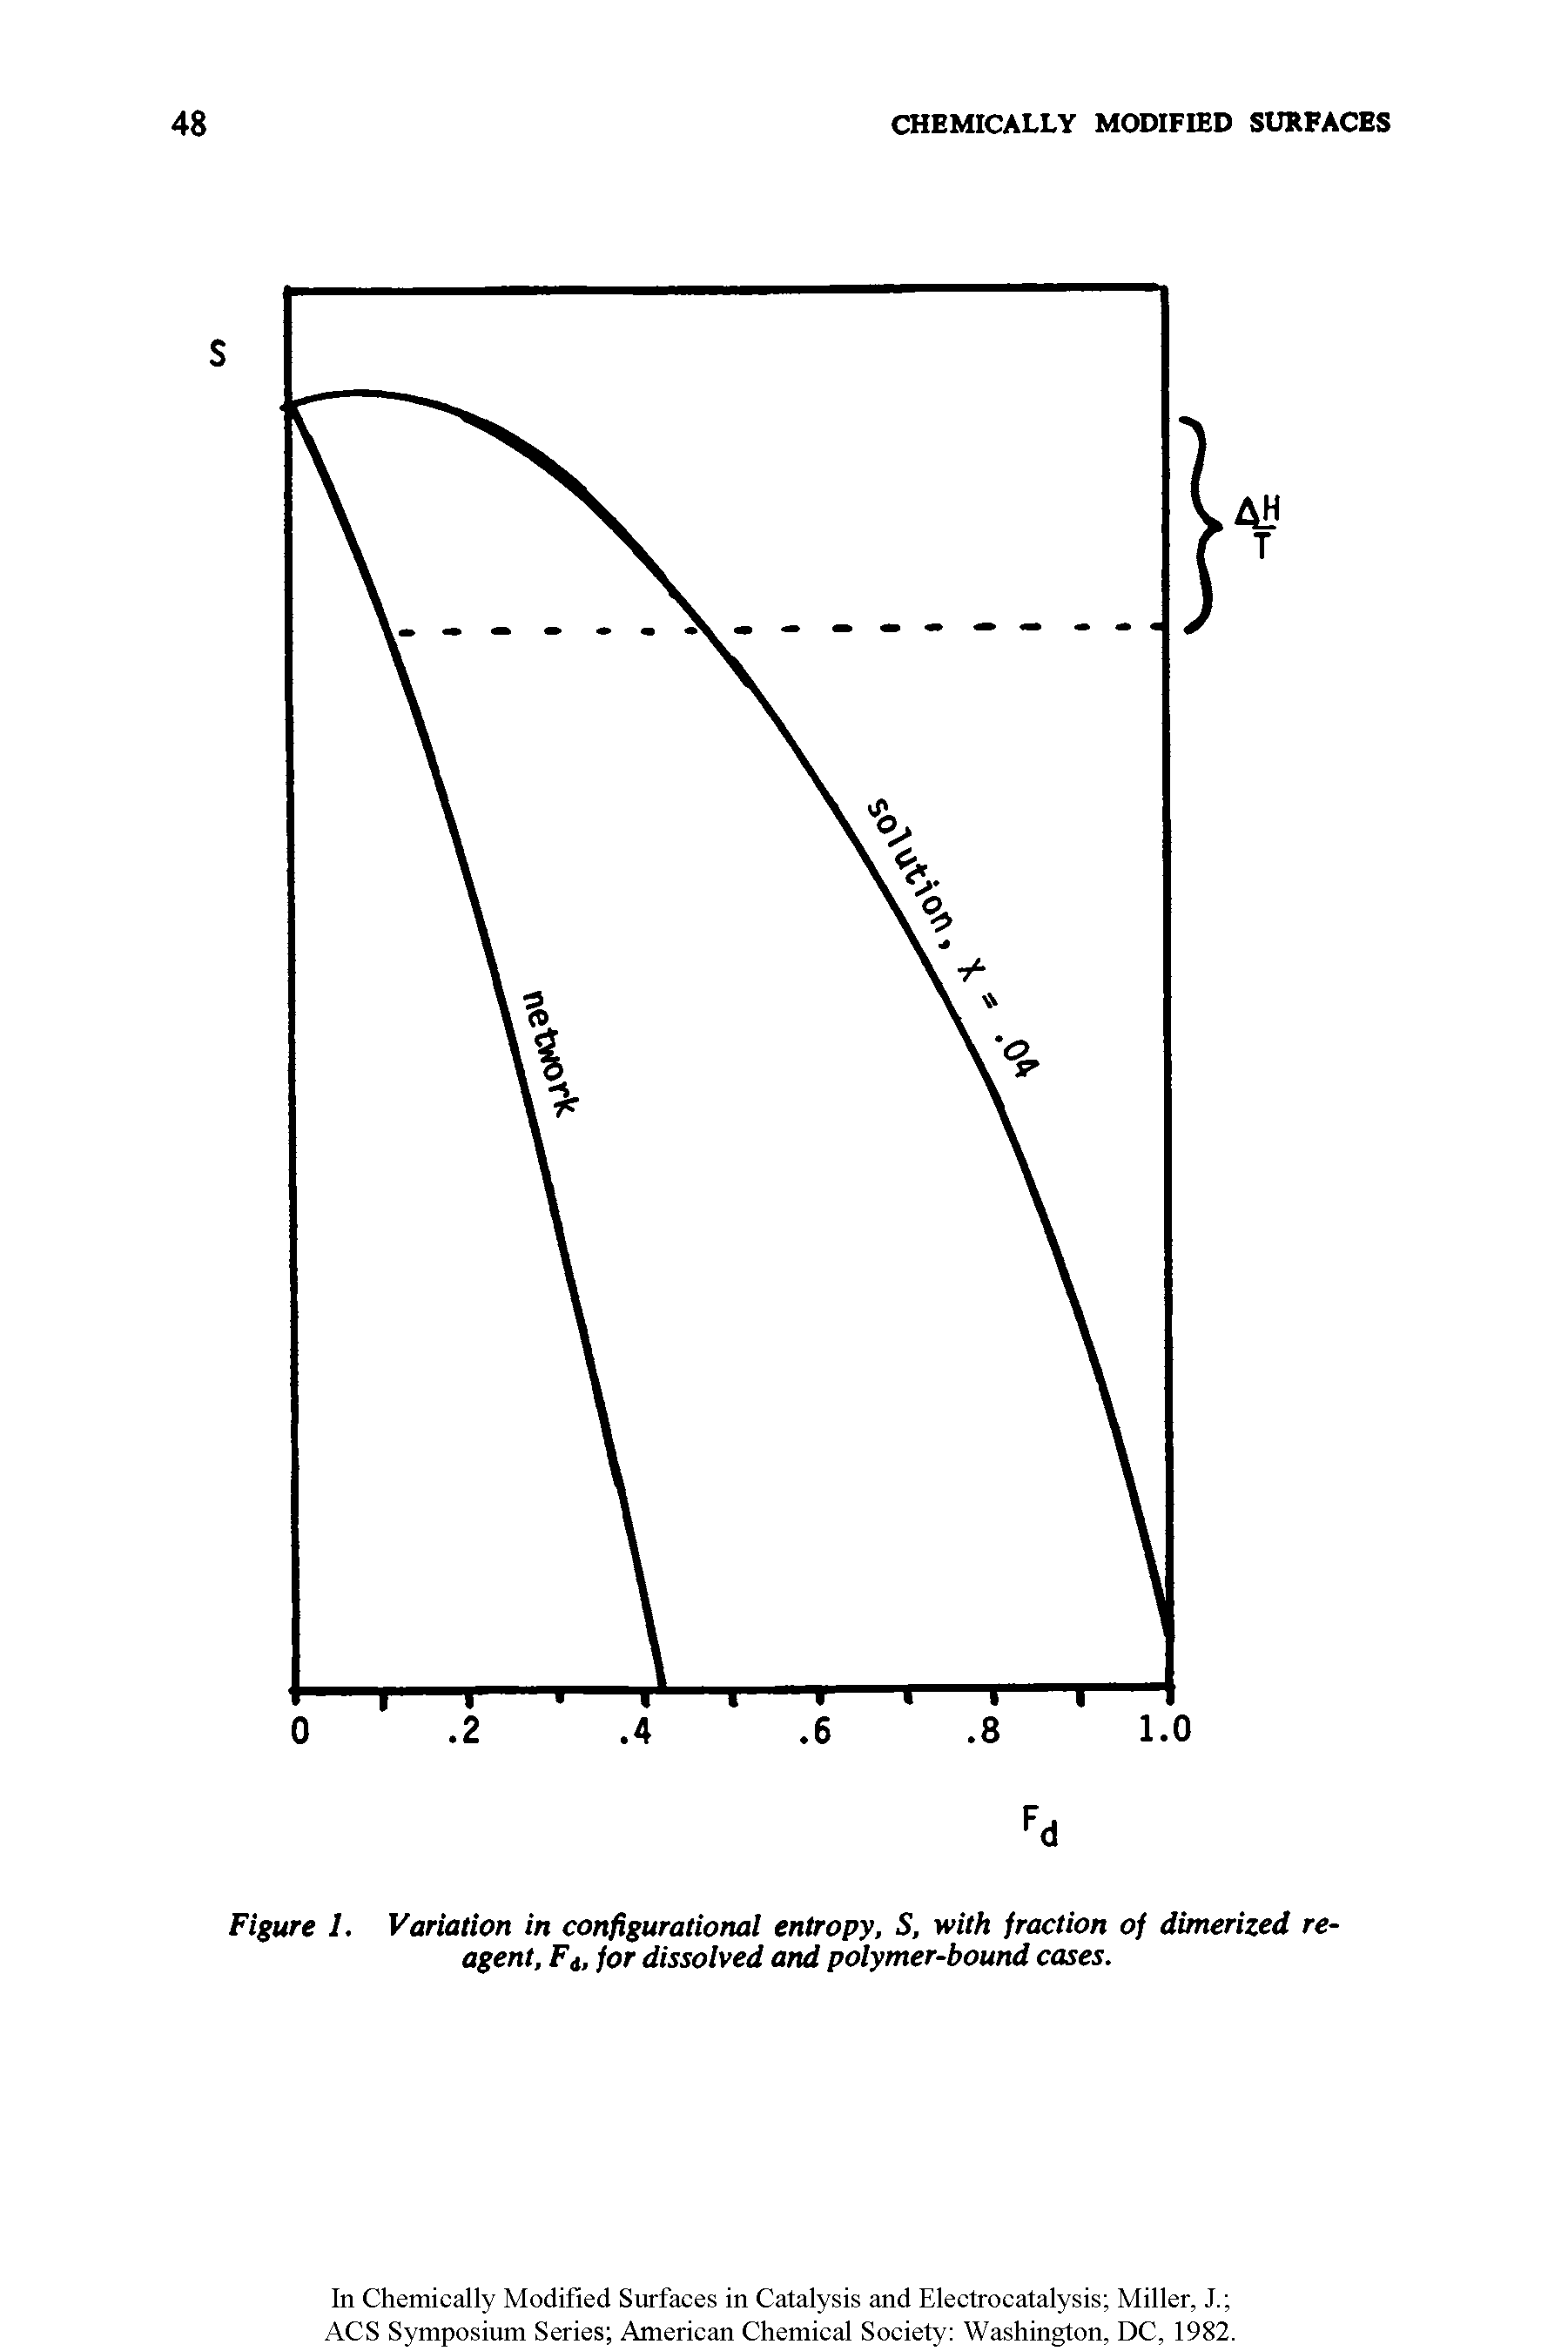 Figure 1. Variation in configurational entropy, S, with fraction of dimerized reagent, Ft, for dissolved and polymer-bound cases.